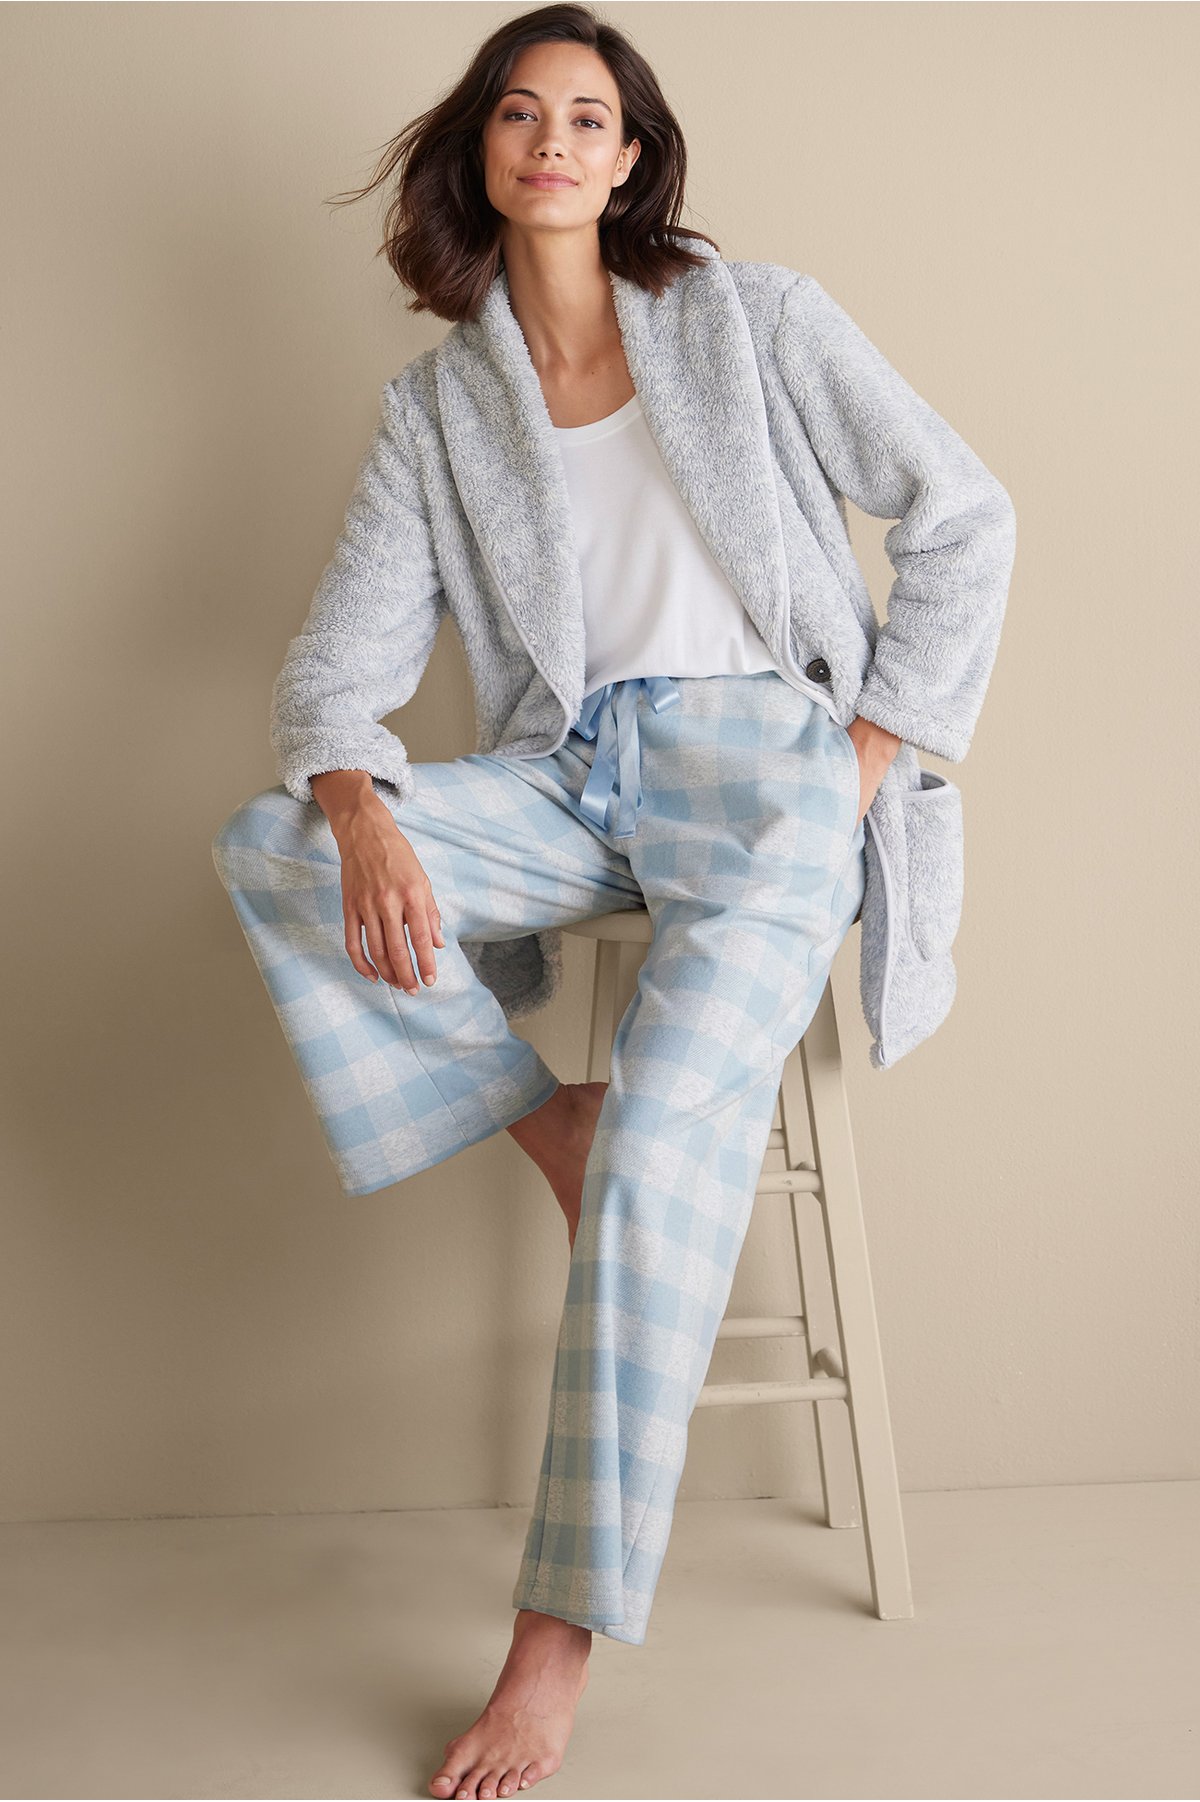 Women's Petites Mad About Plaid Pant by Soft Surroundings, in Blue Plaid size PM (10-12)